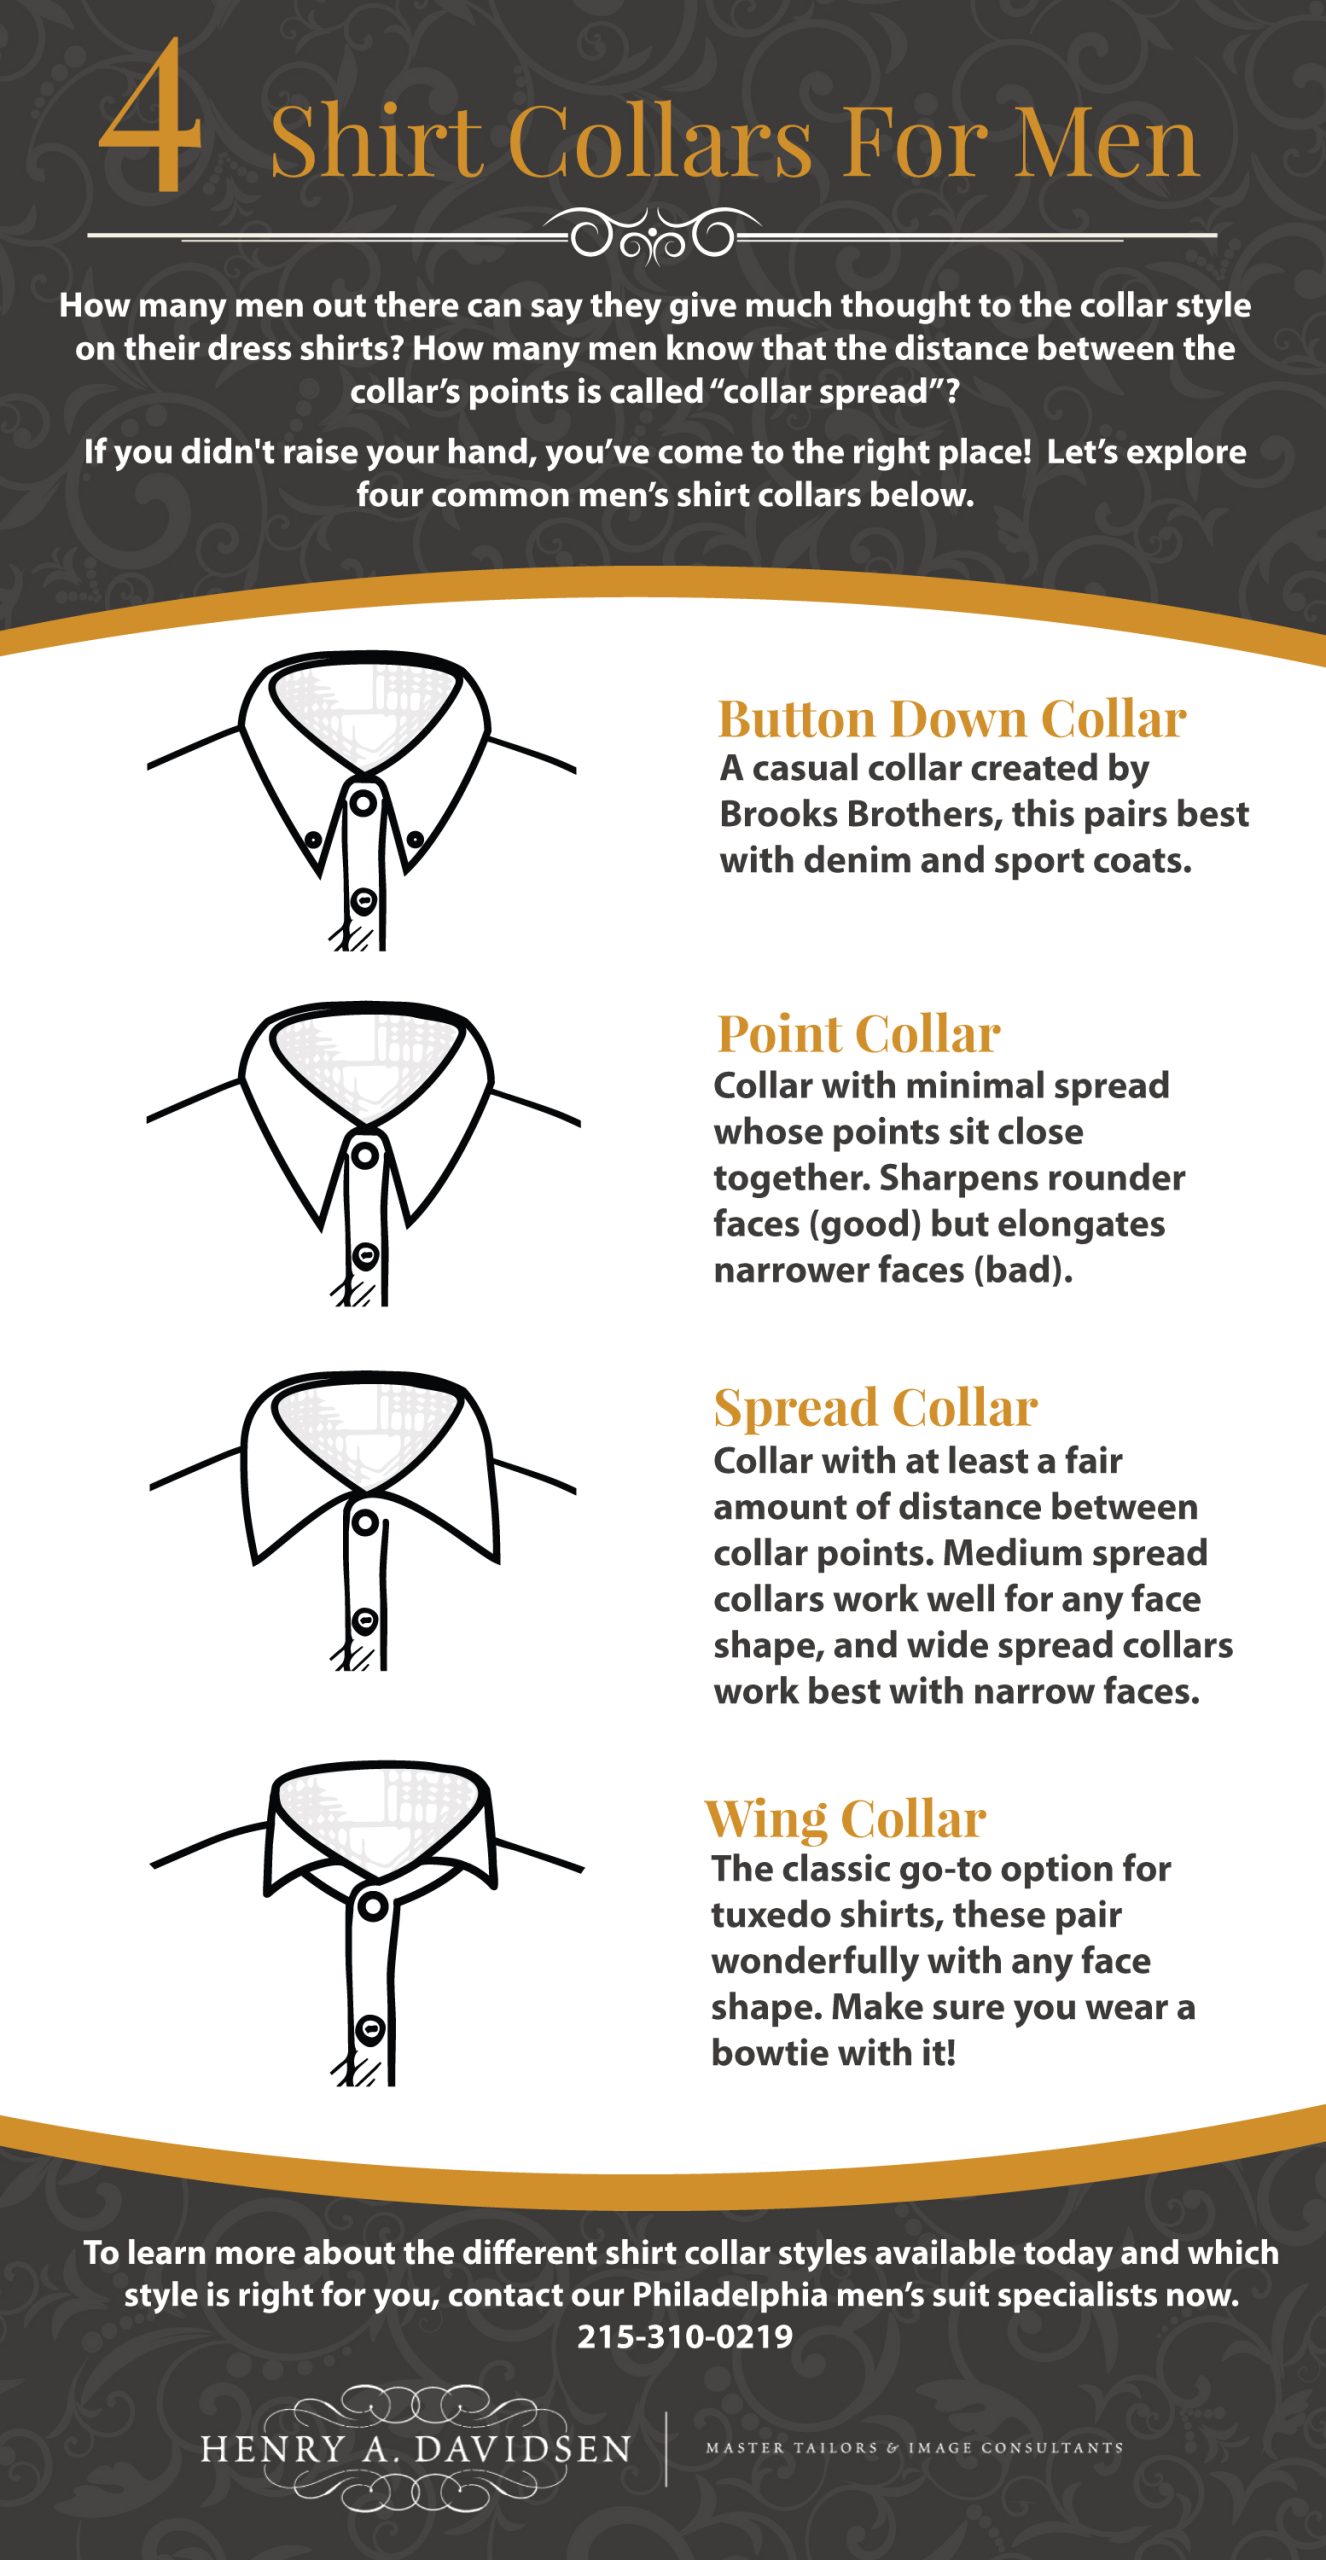 How To Maintain & Care For Custom Shirts - Henry A. Davidsen